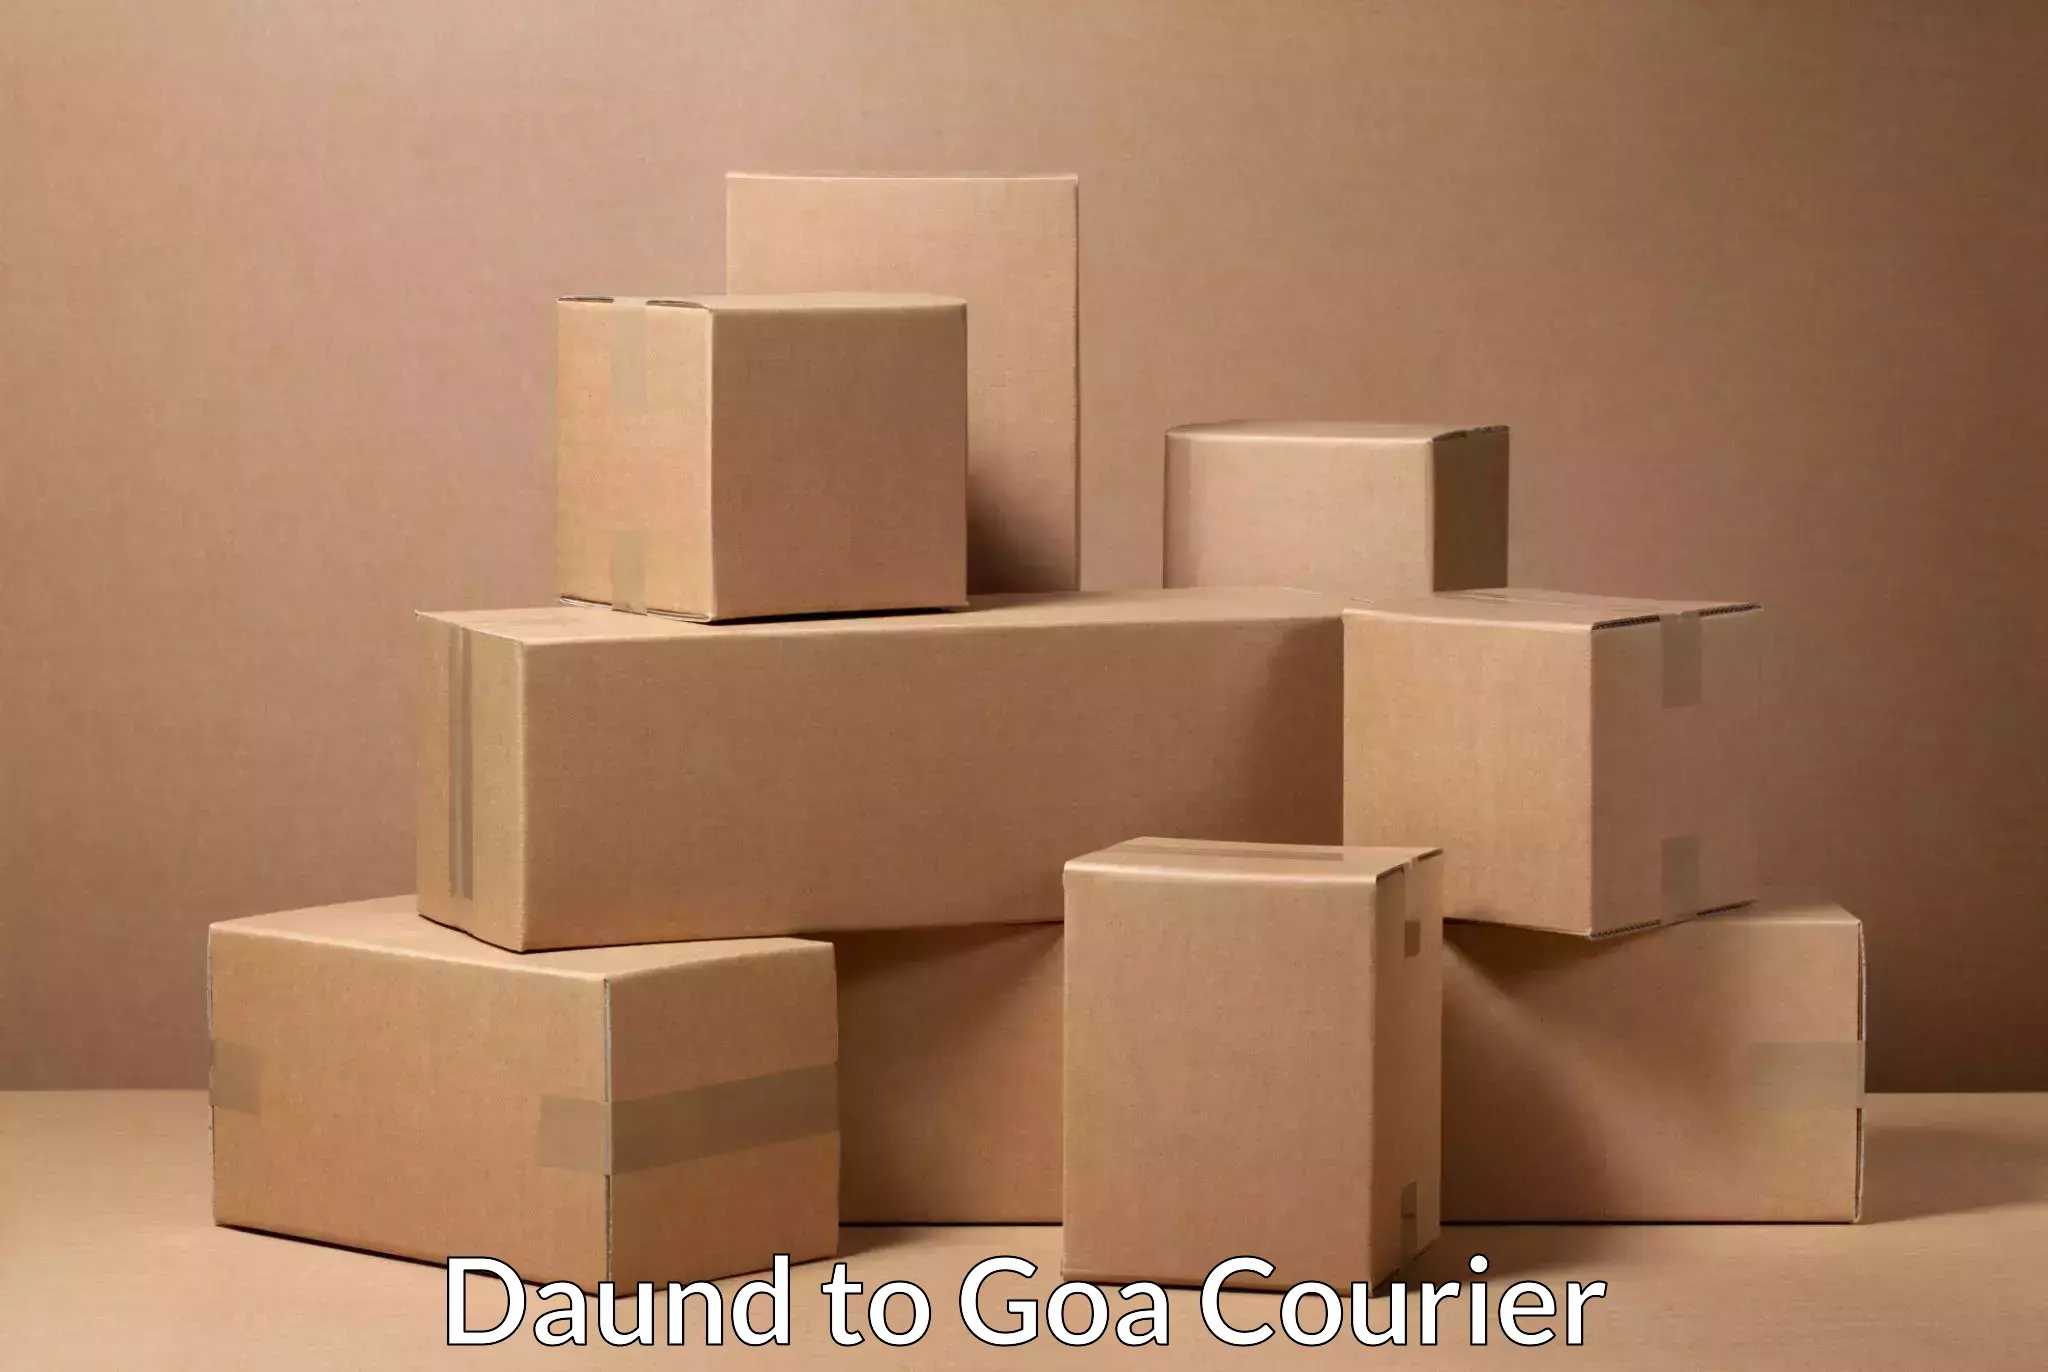 Nationwide shipping coverage Daund to South Goa